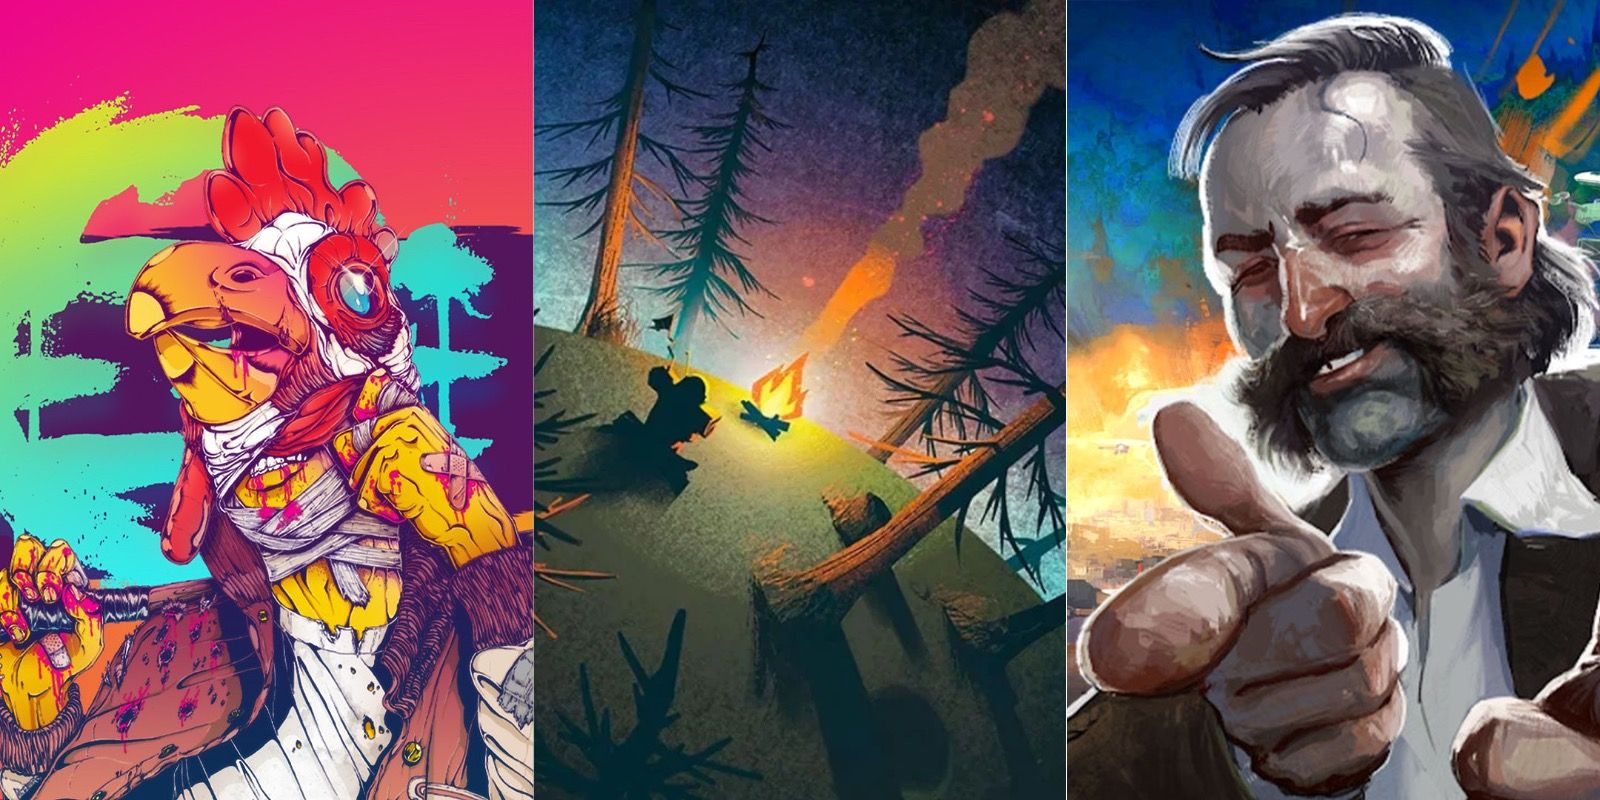 Protagonists from Hotline Miami and Disco Elysium either side of an image from Outer Wilds